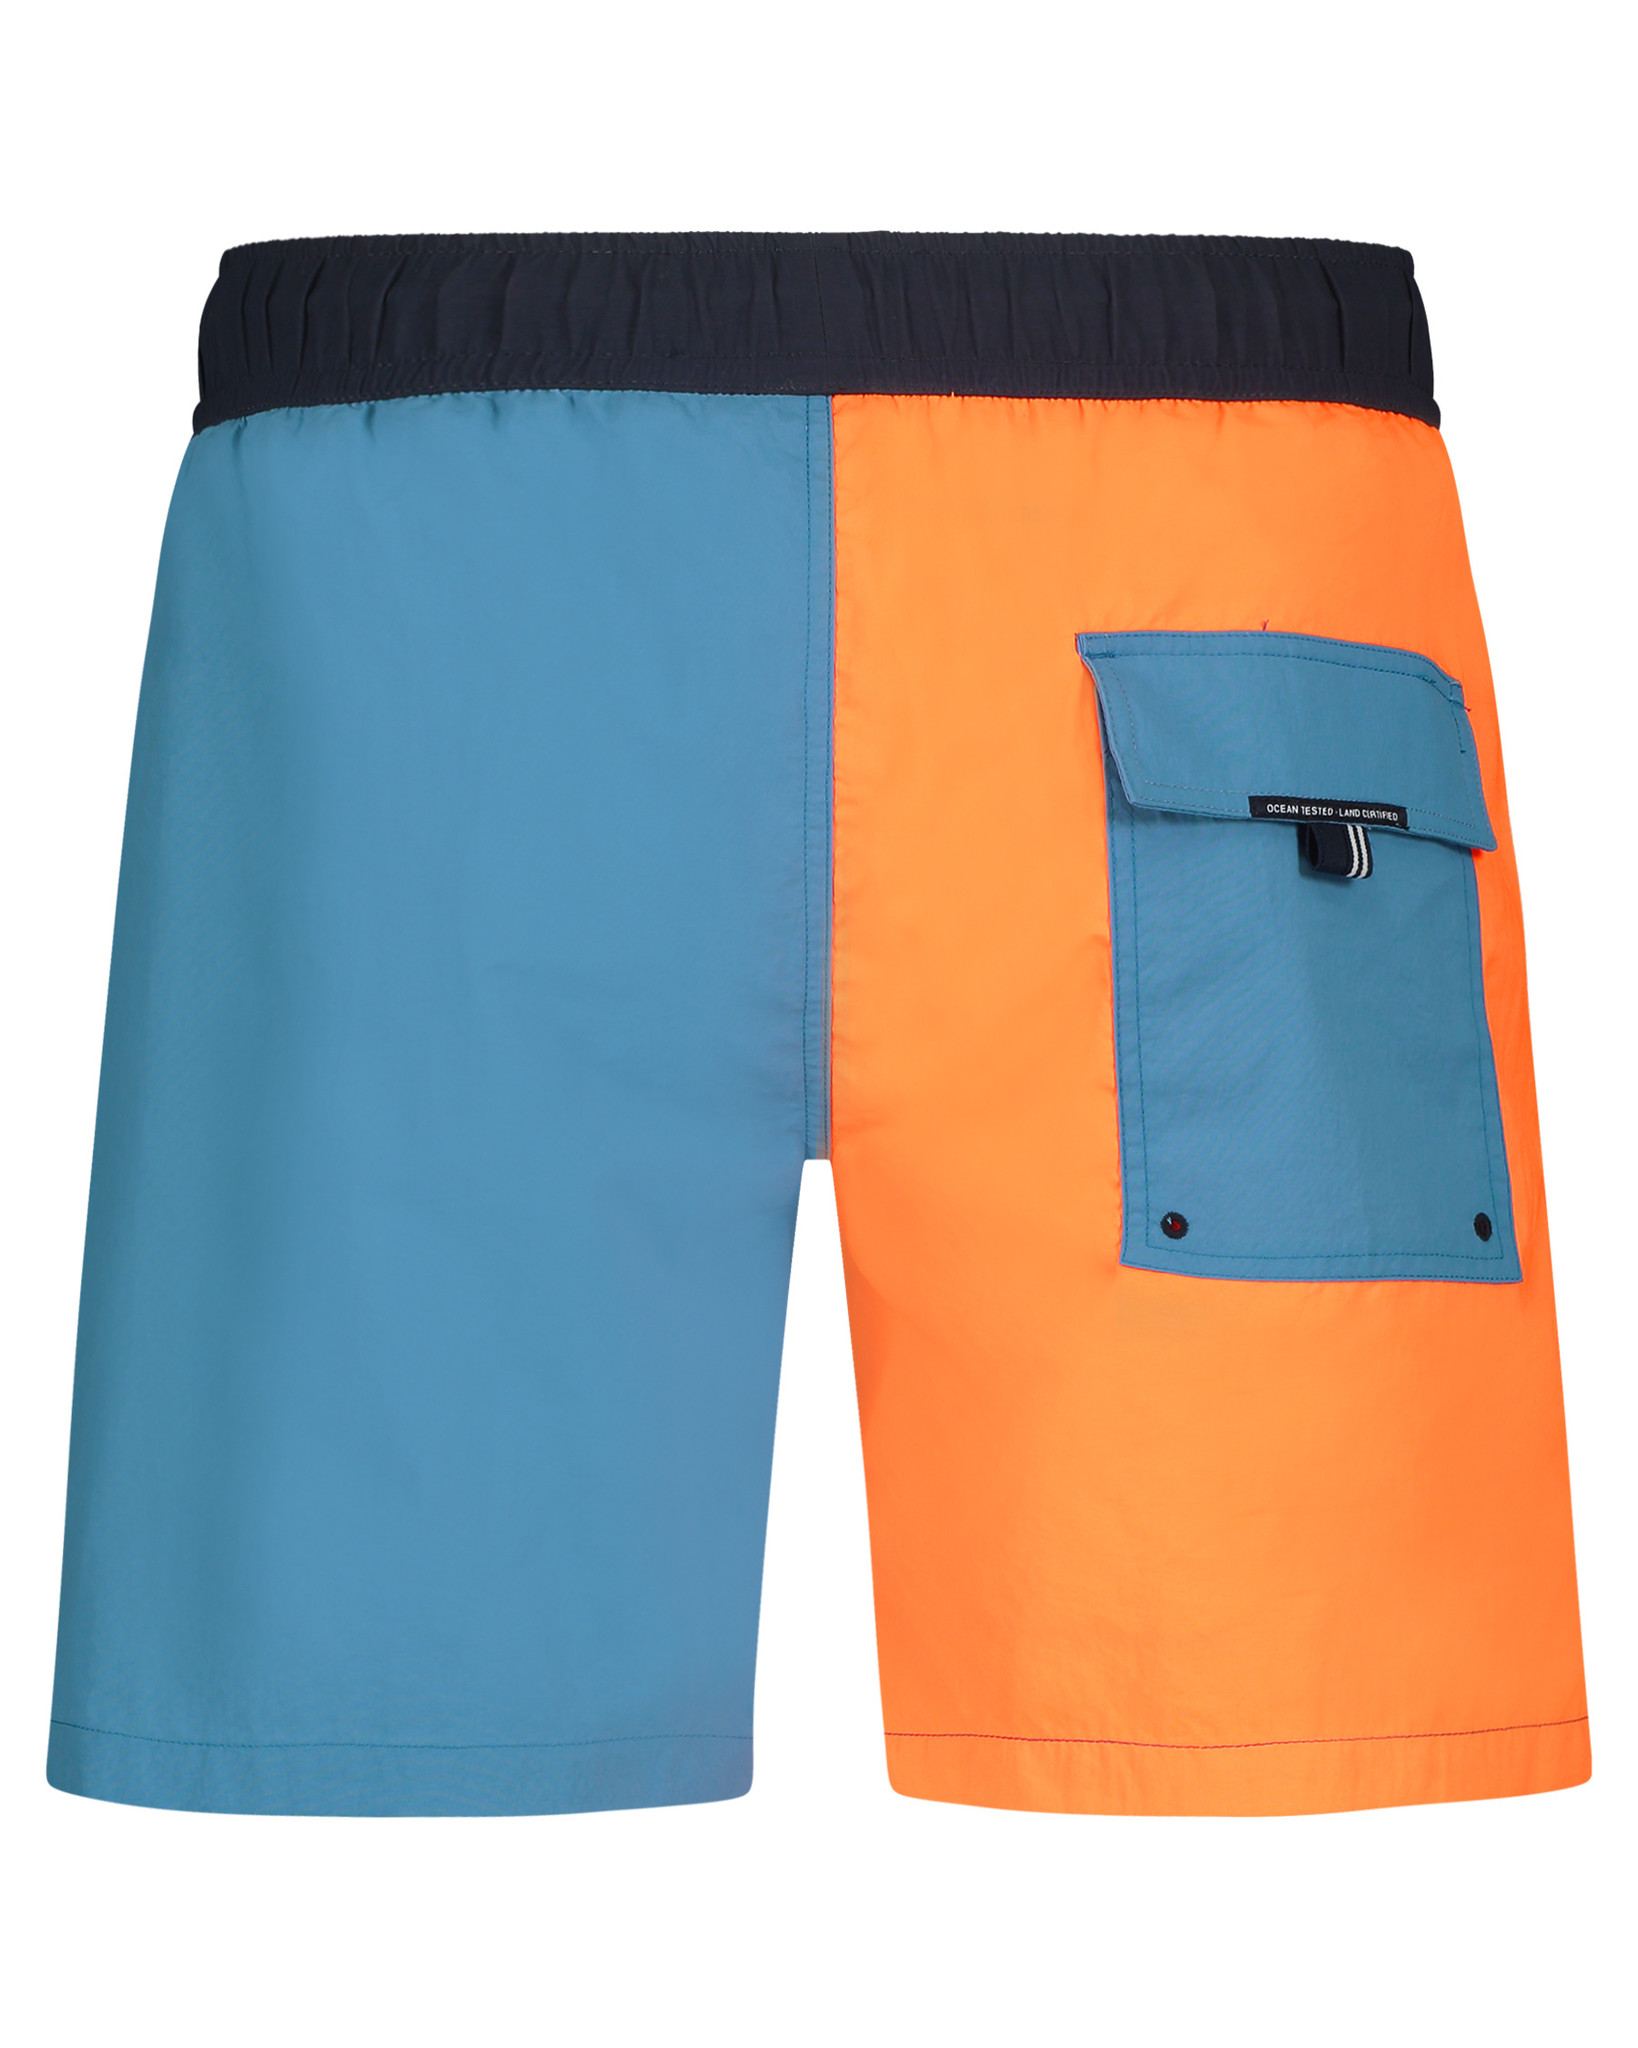 Swimming shorts Seafloor with color blocking design